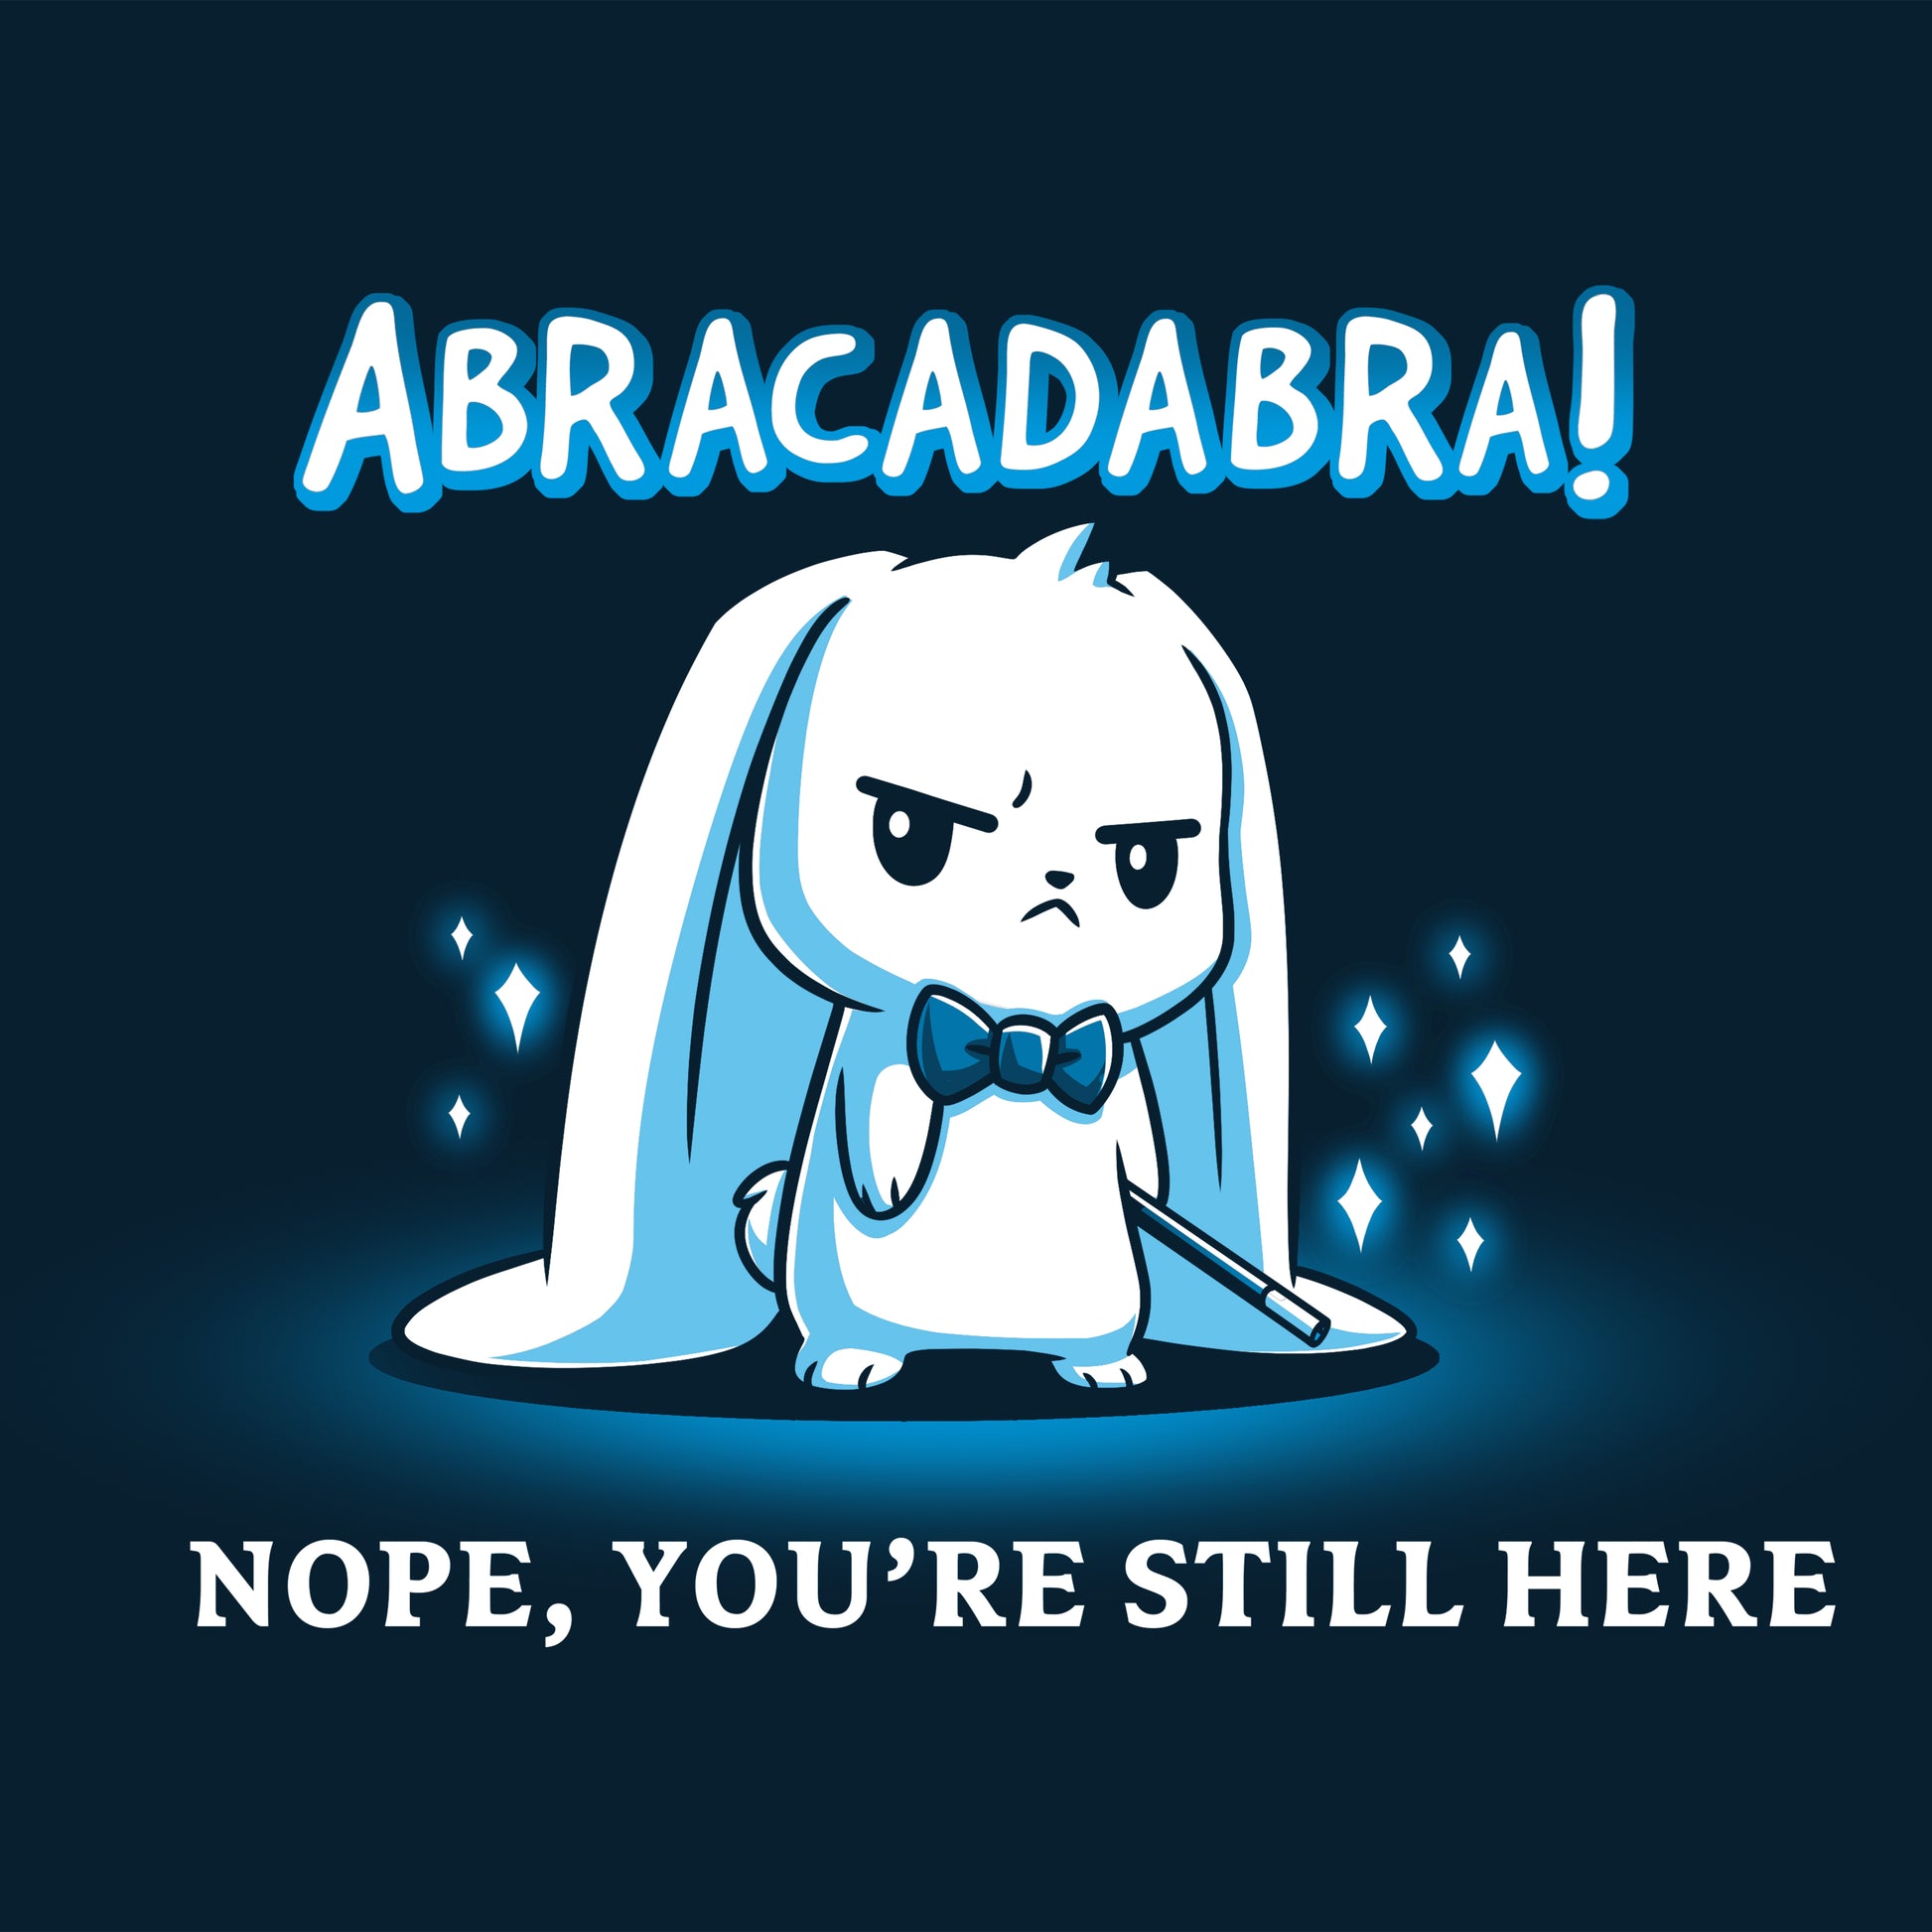 A cartoon bunny performing magic tricks while wearing a TeeTurtle navy blue Abracadabra t-shirt, surrounded by social creatures.